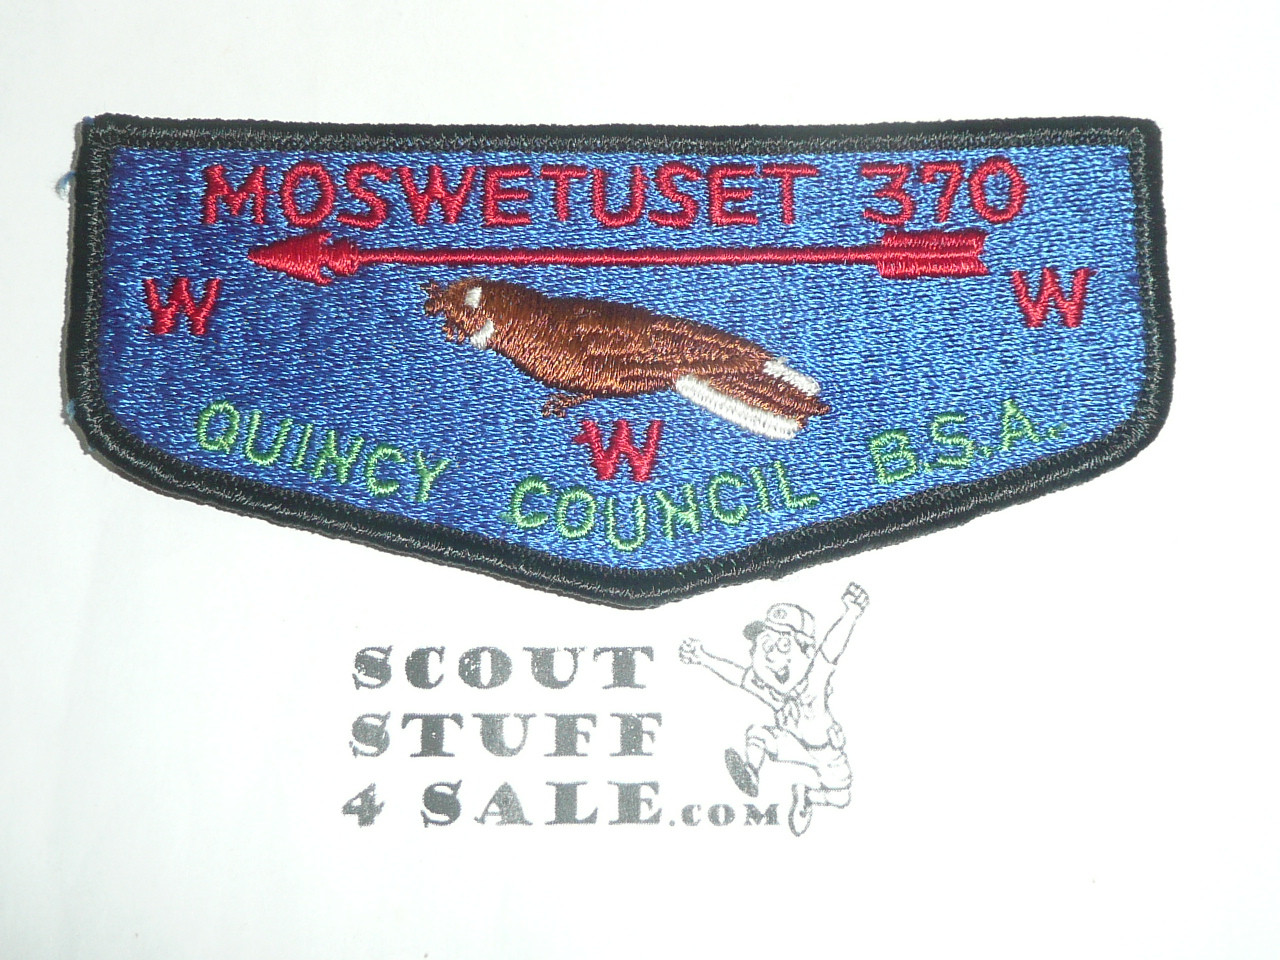 Order of the Arrow Lodge #370 Moswetuset s1 Flap Patch